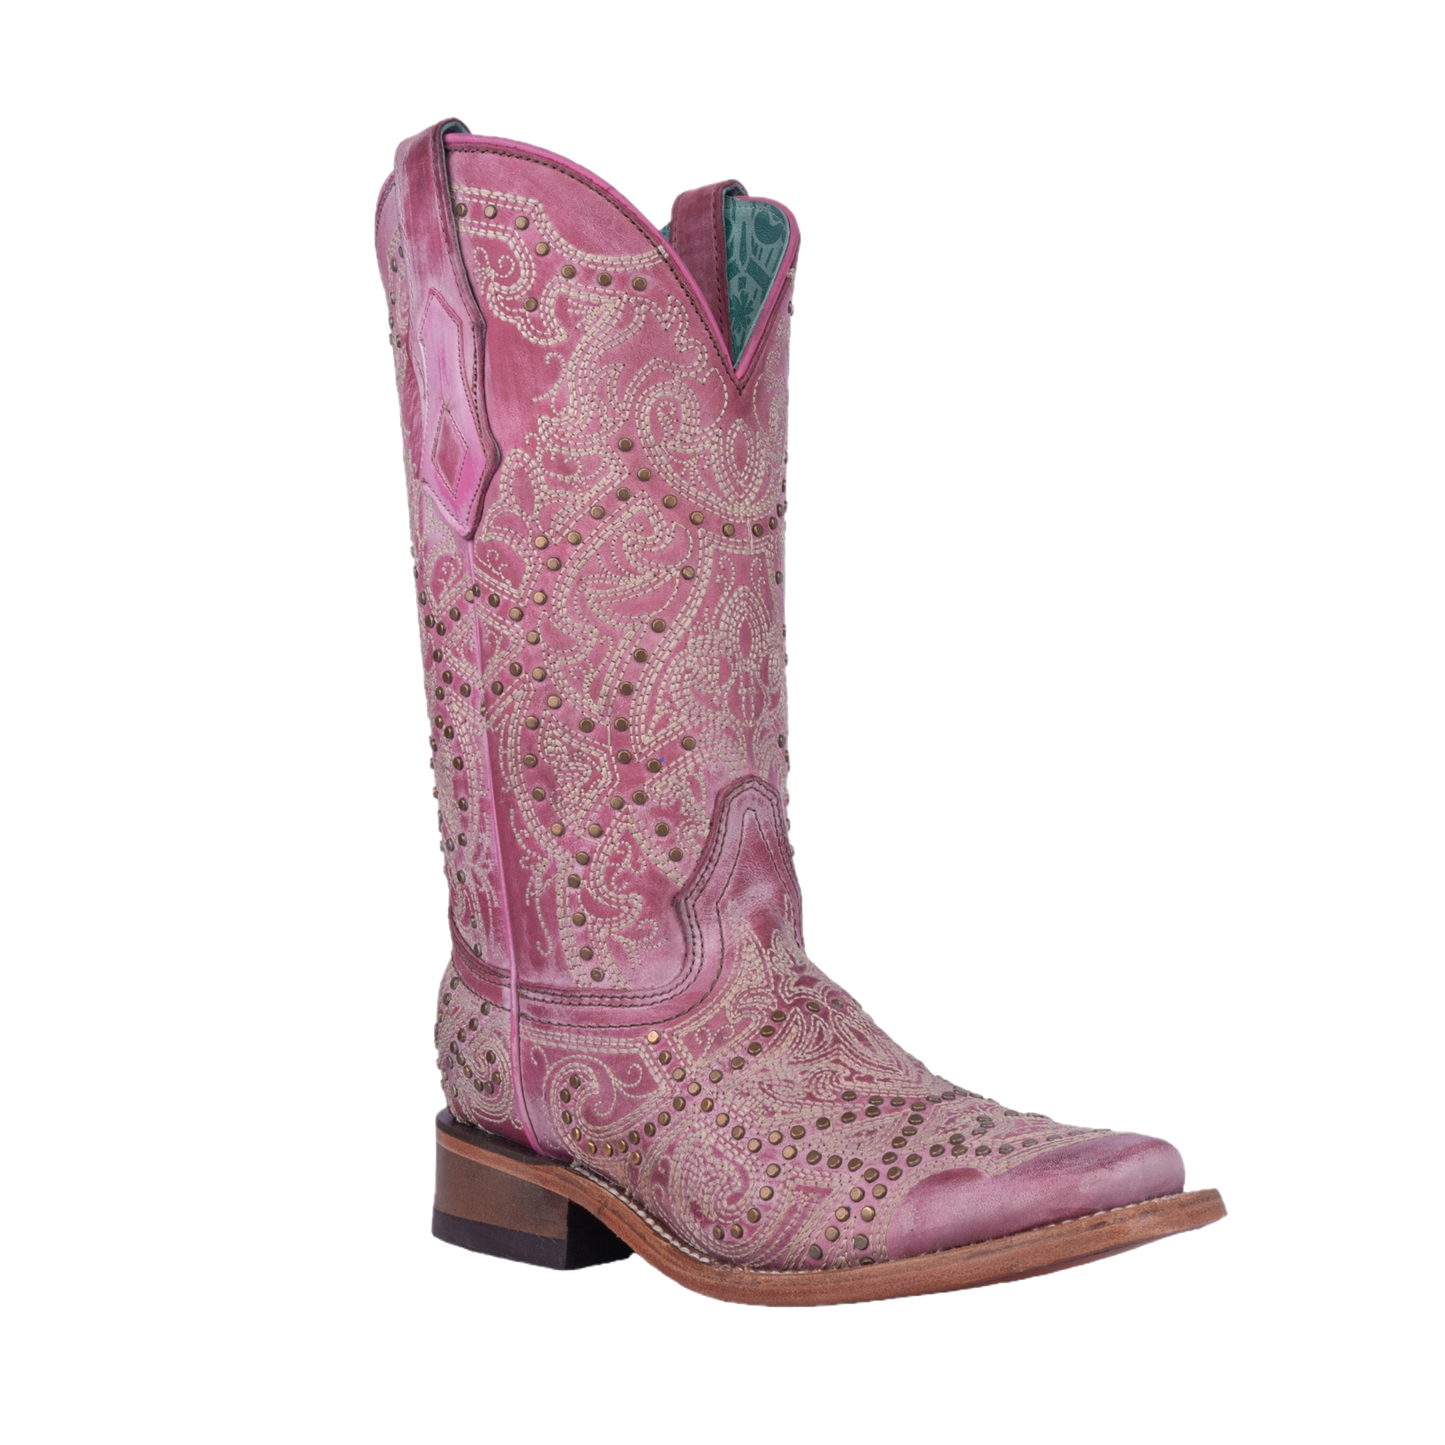 Corral Ladies Studded & Embroidered Powder Pink Western Boots C4042